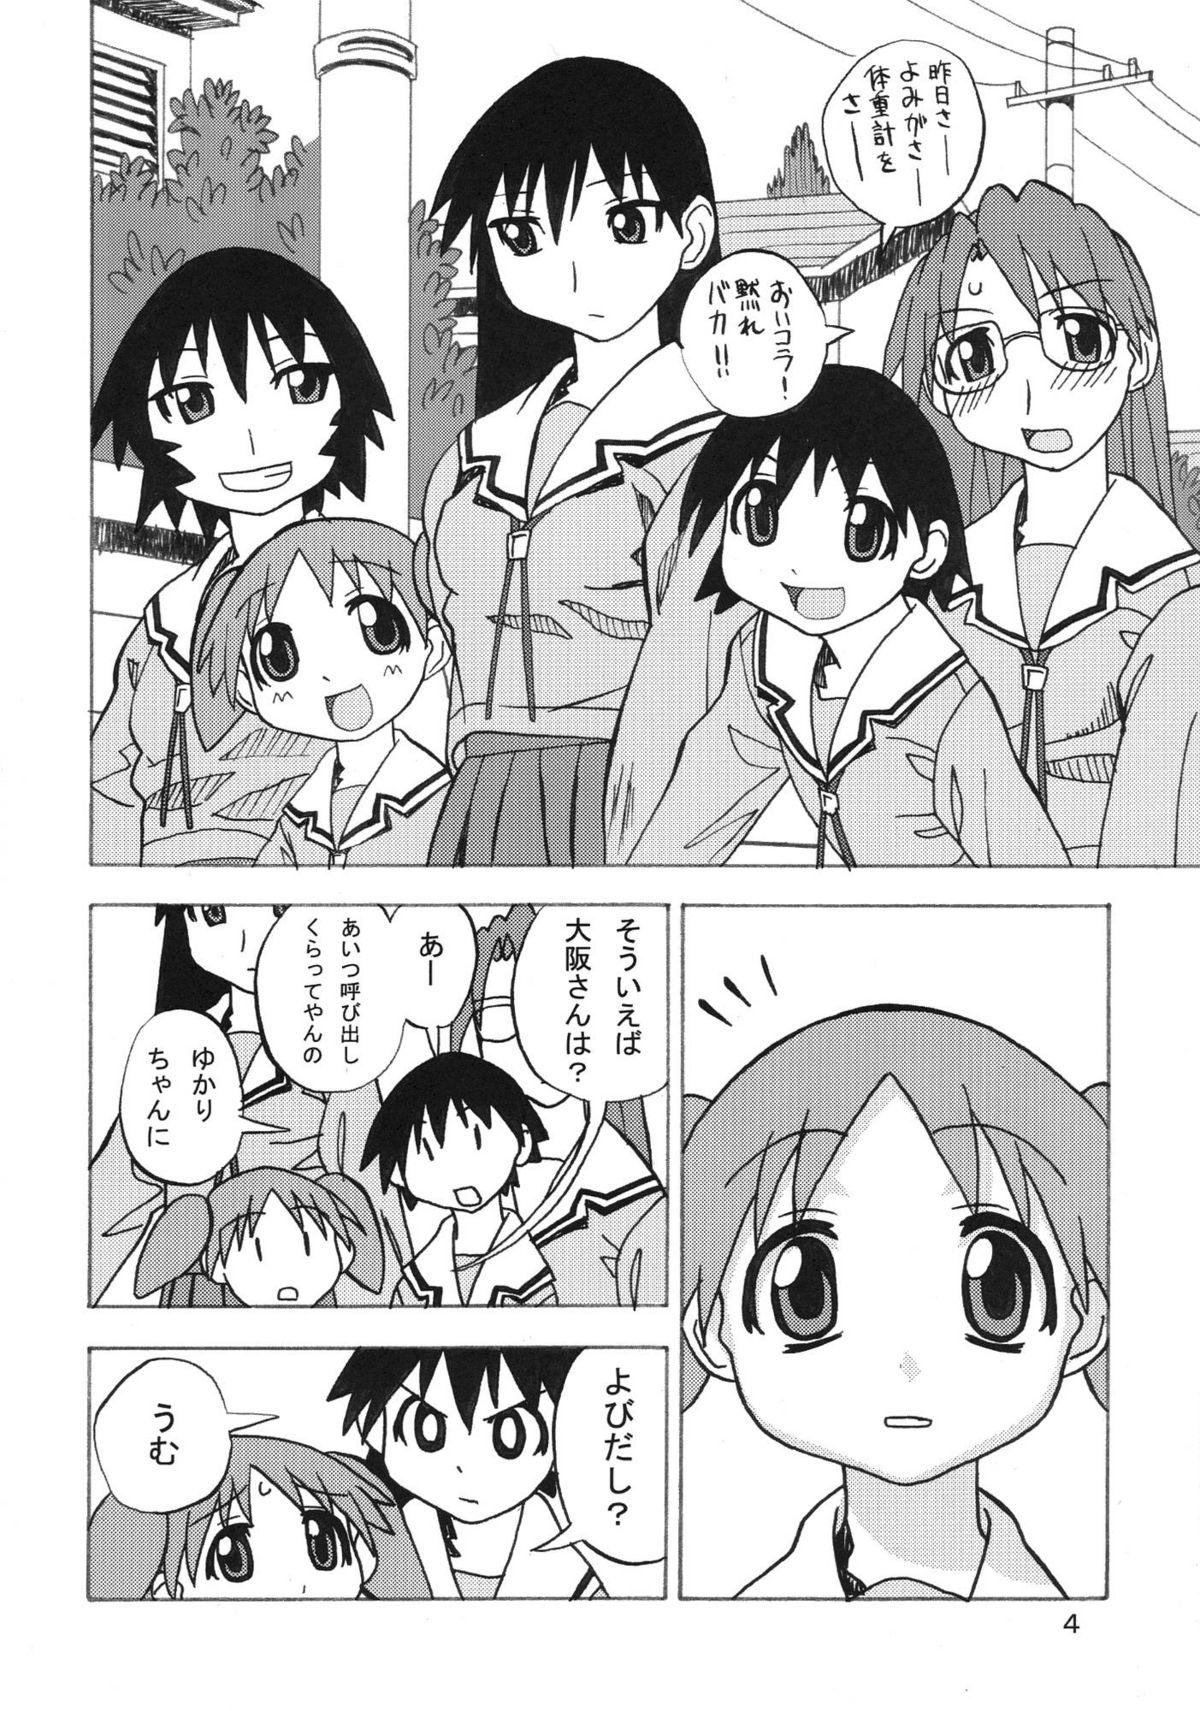 Exhibitionist Ano-Are - Azumanga daioh 18 Year Old Porn - Page 4